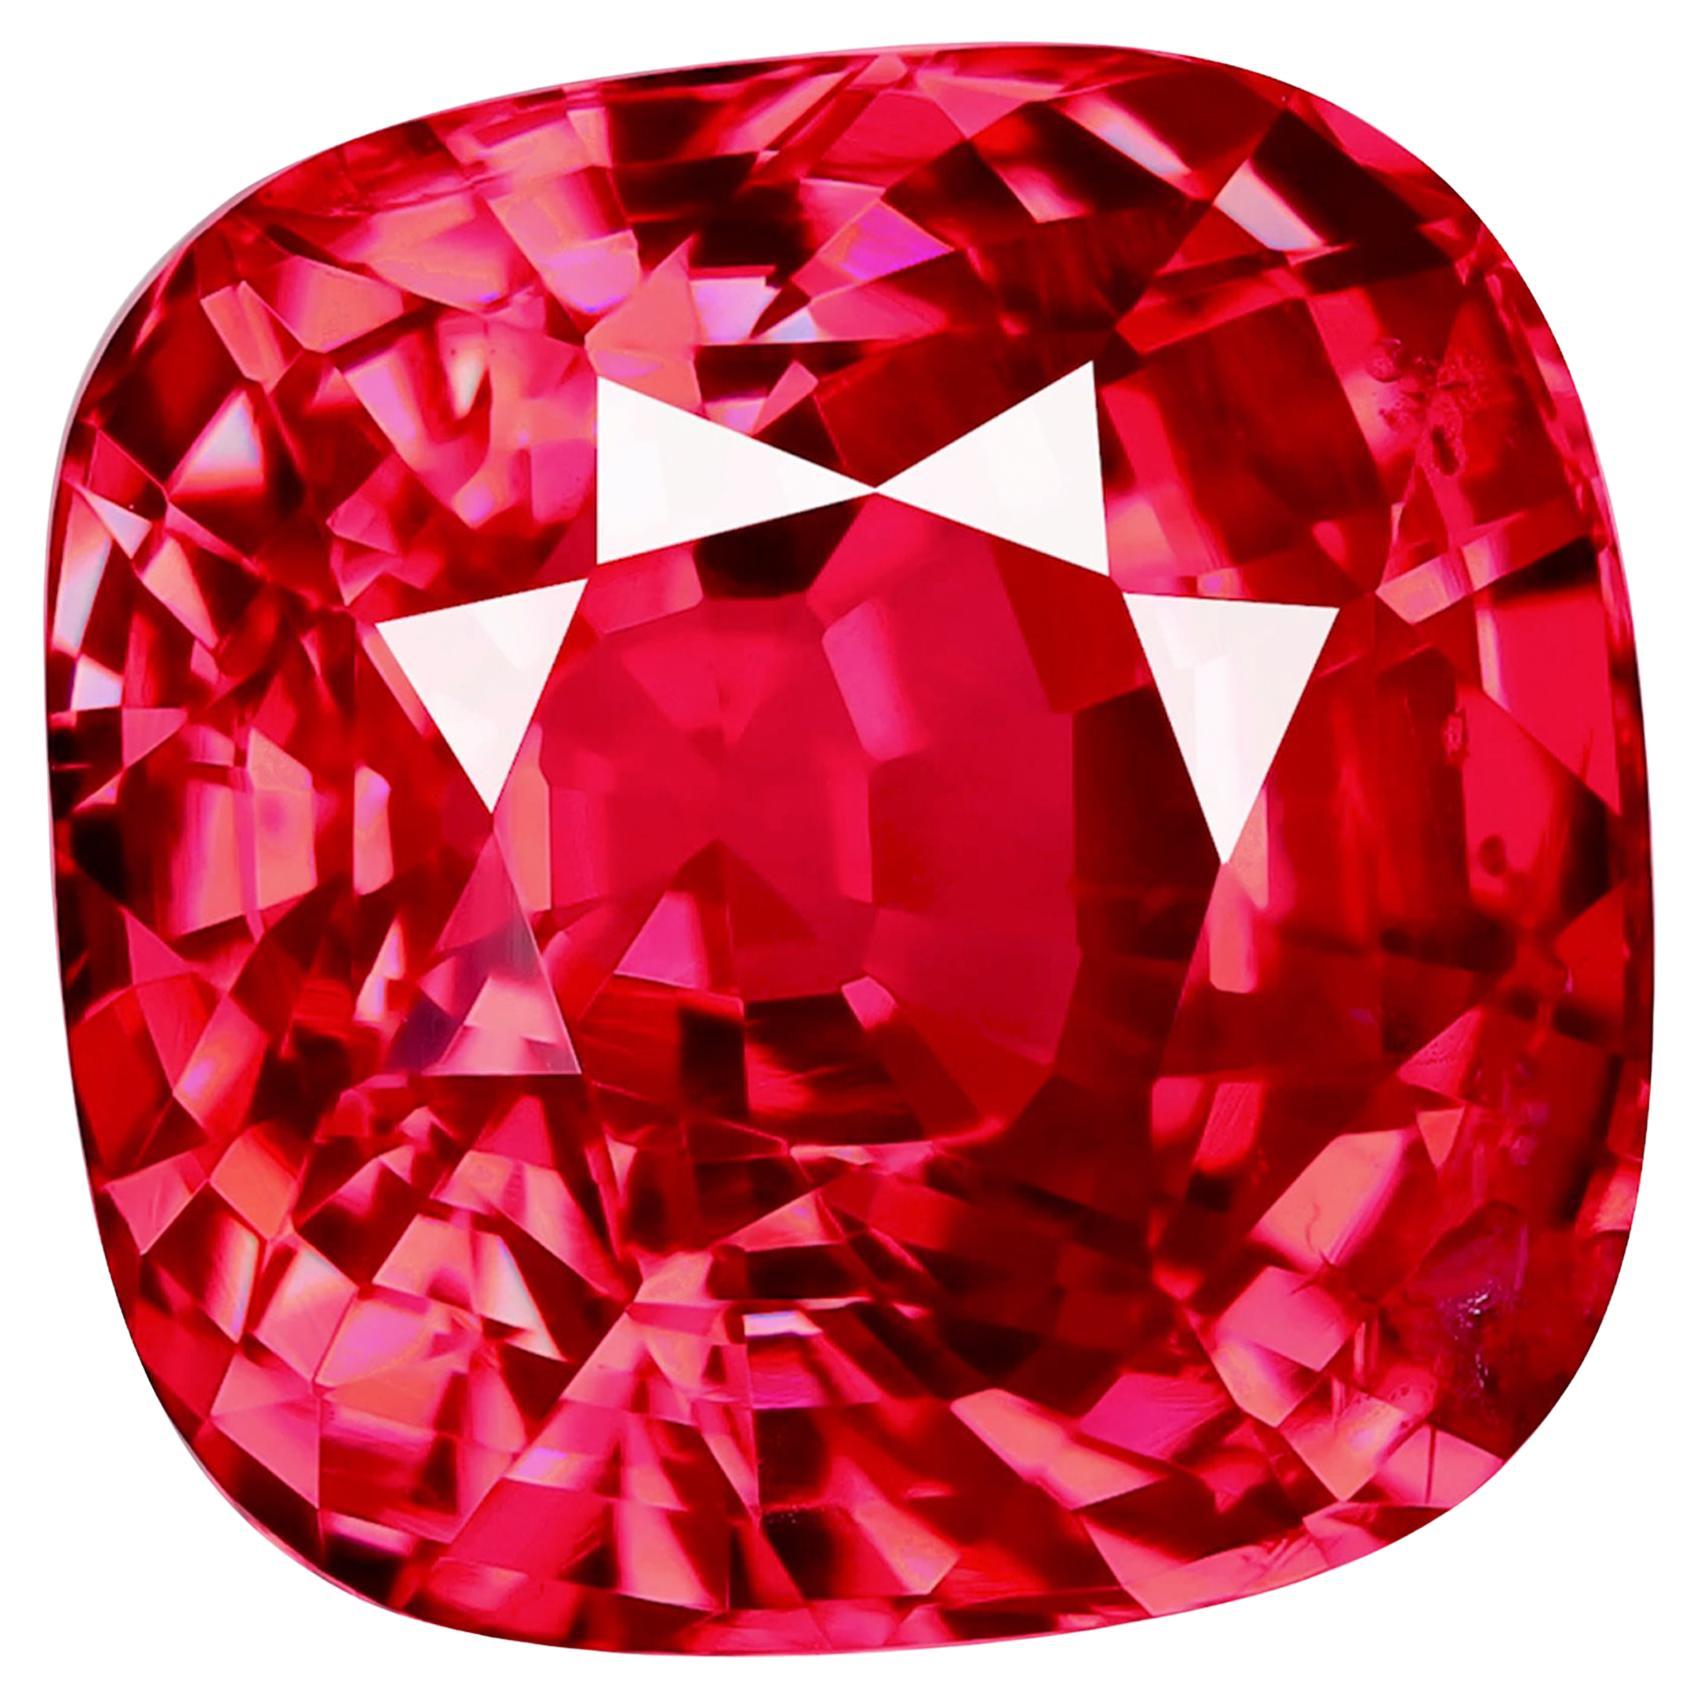 GRS Platinum Awarded 6.08Cts Neon Pinkish Red "Vibrant" Tanzanian Mahenge Spinel For Sale